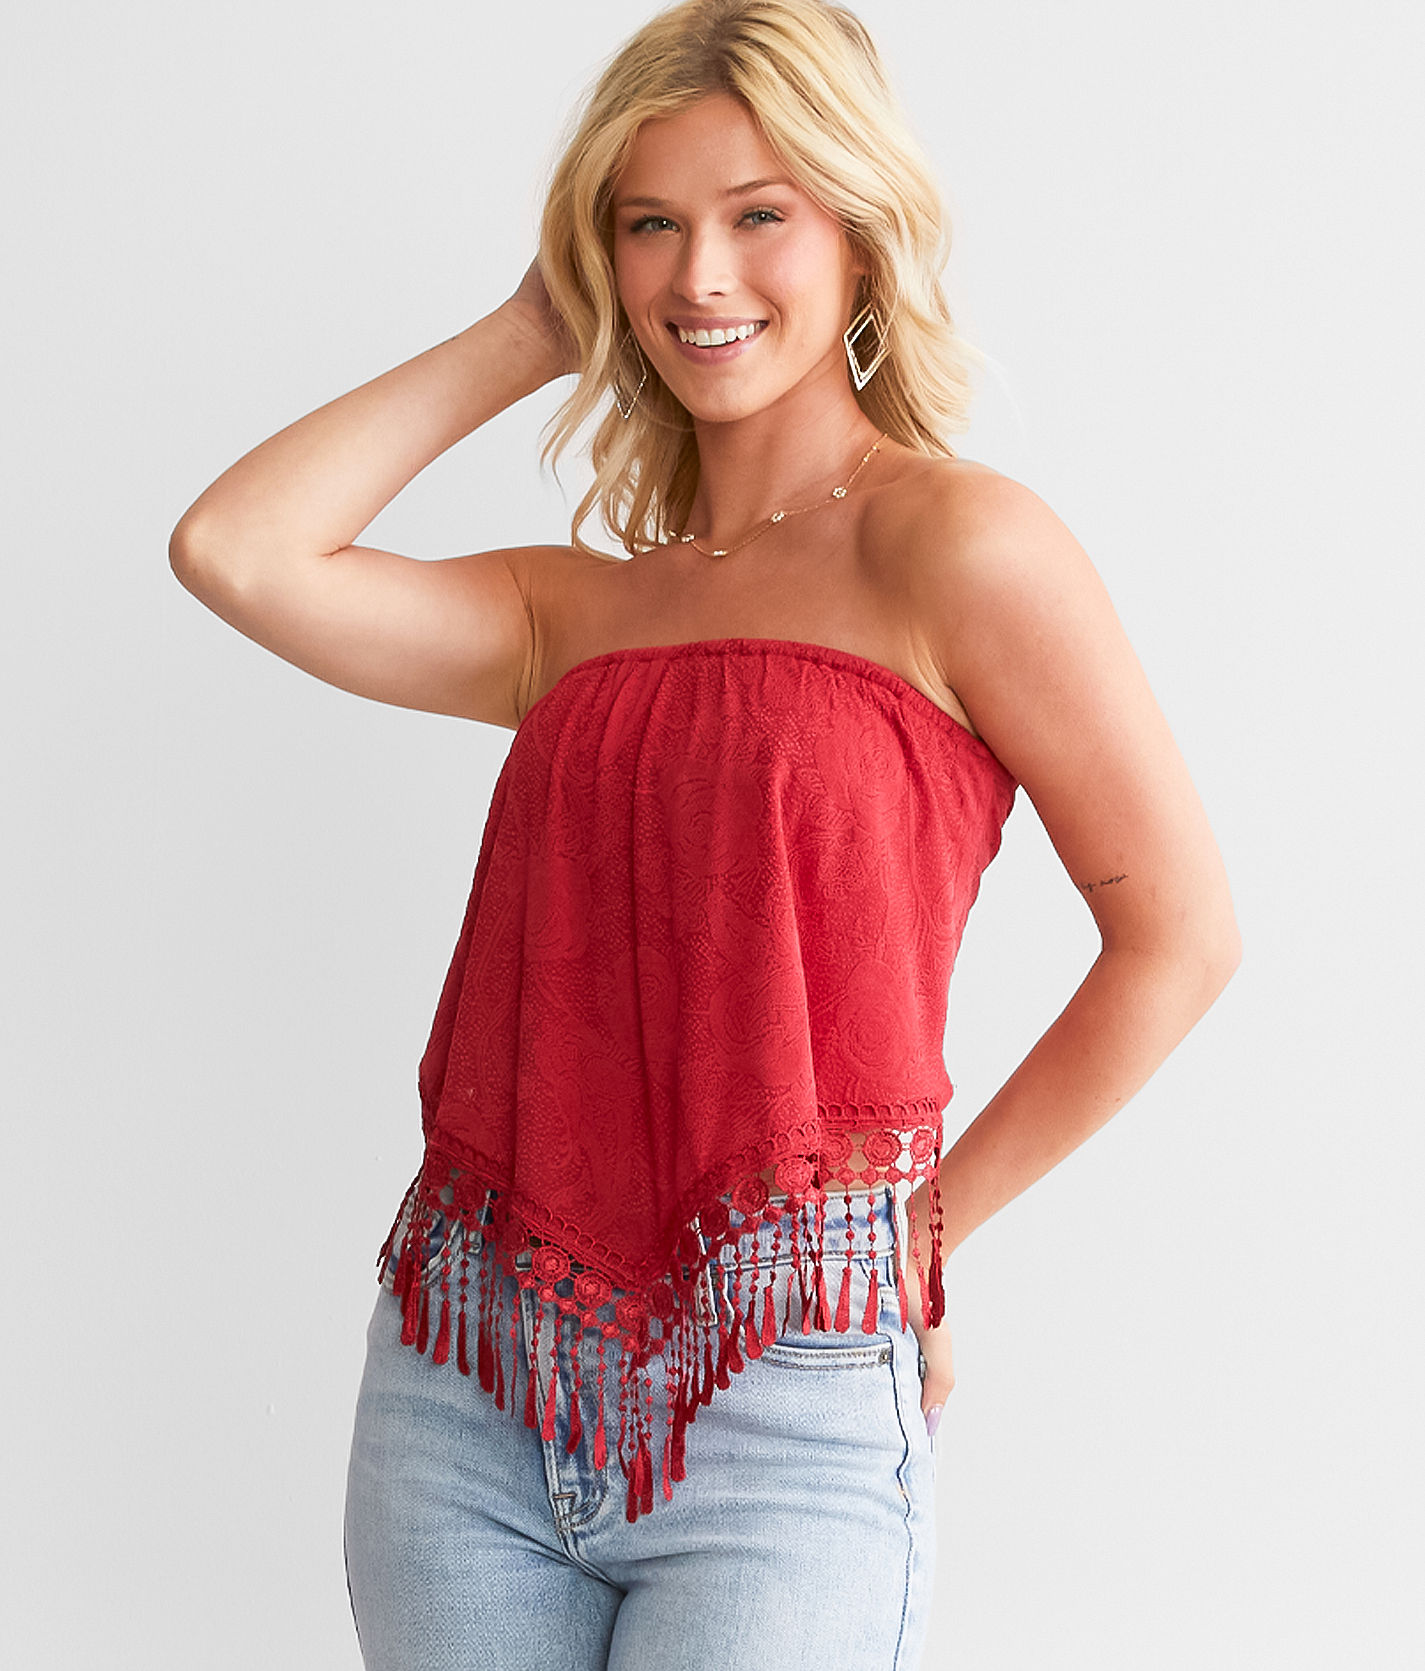 Willow & Root Jacquard Hanky Tube Top - Women's Shirts/Blouses in Deep |